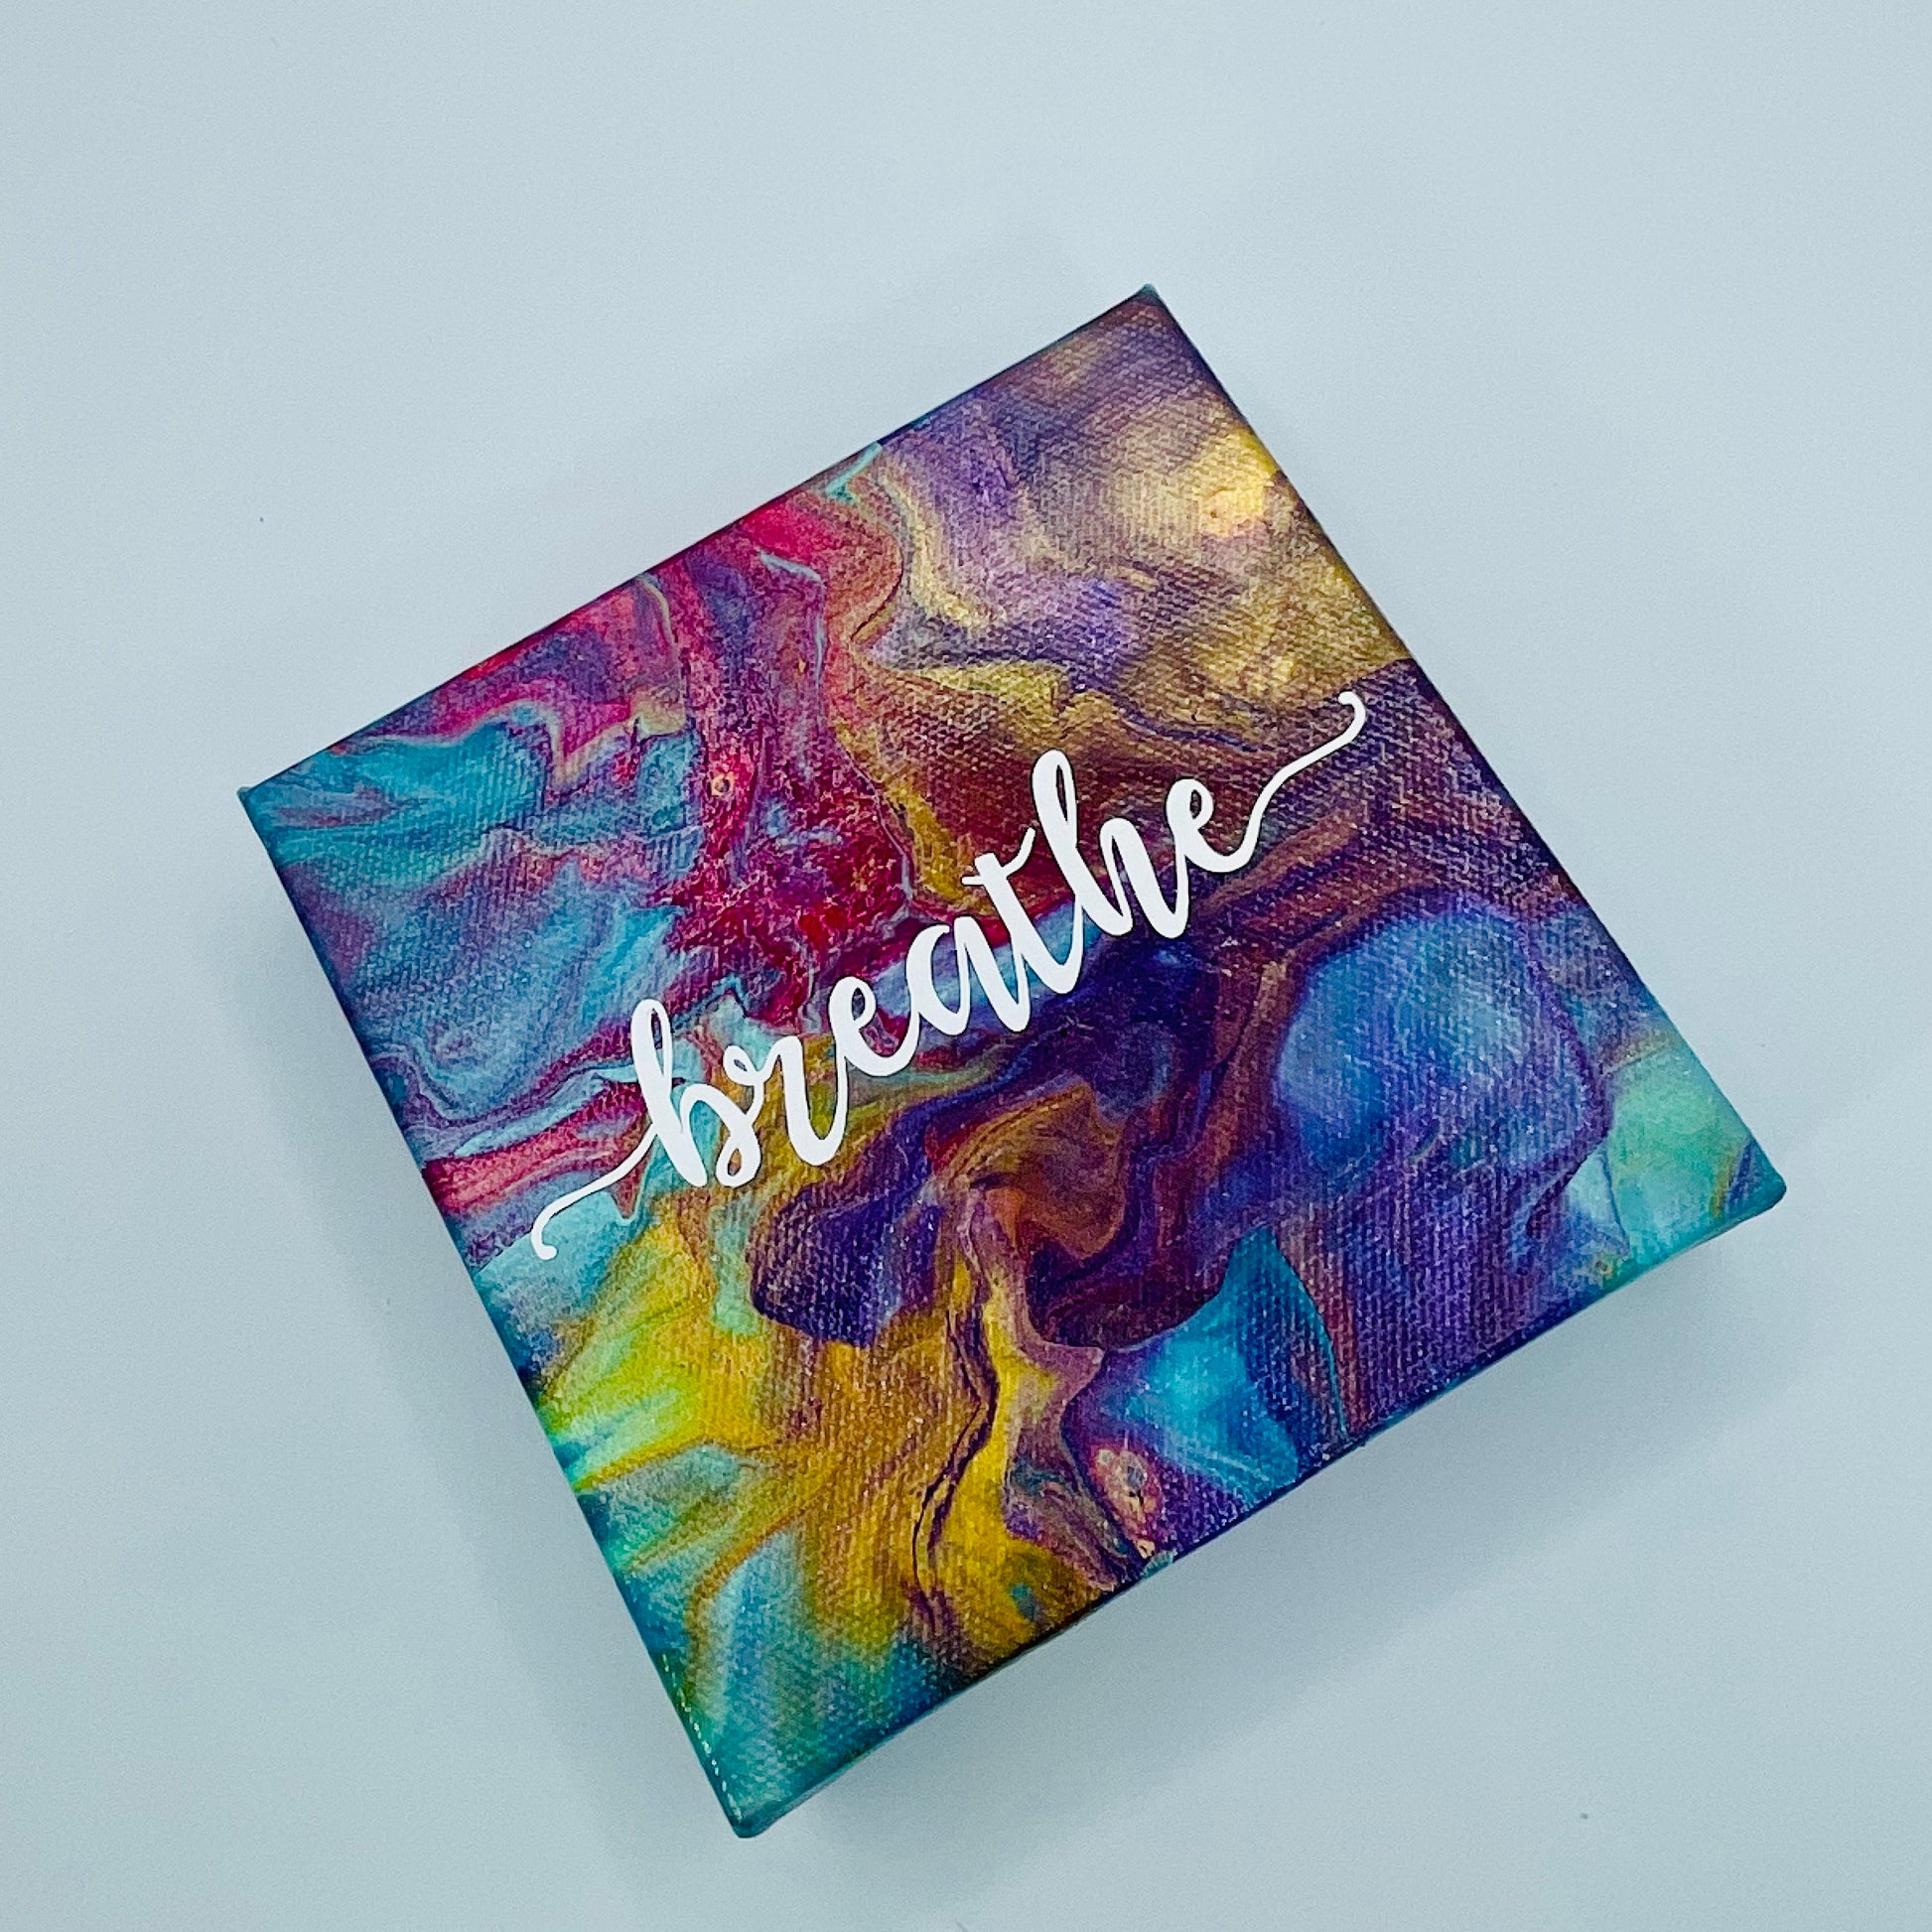 The Sufi Breathe Block. A colorful hand painted painting that says 'breathe'